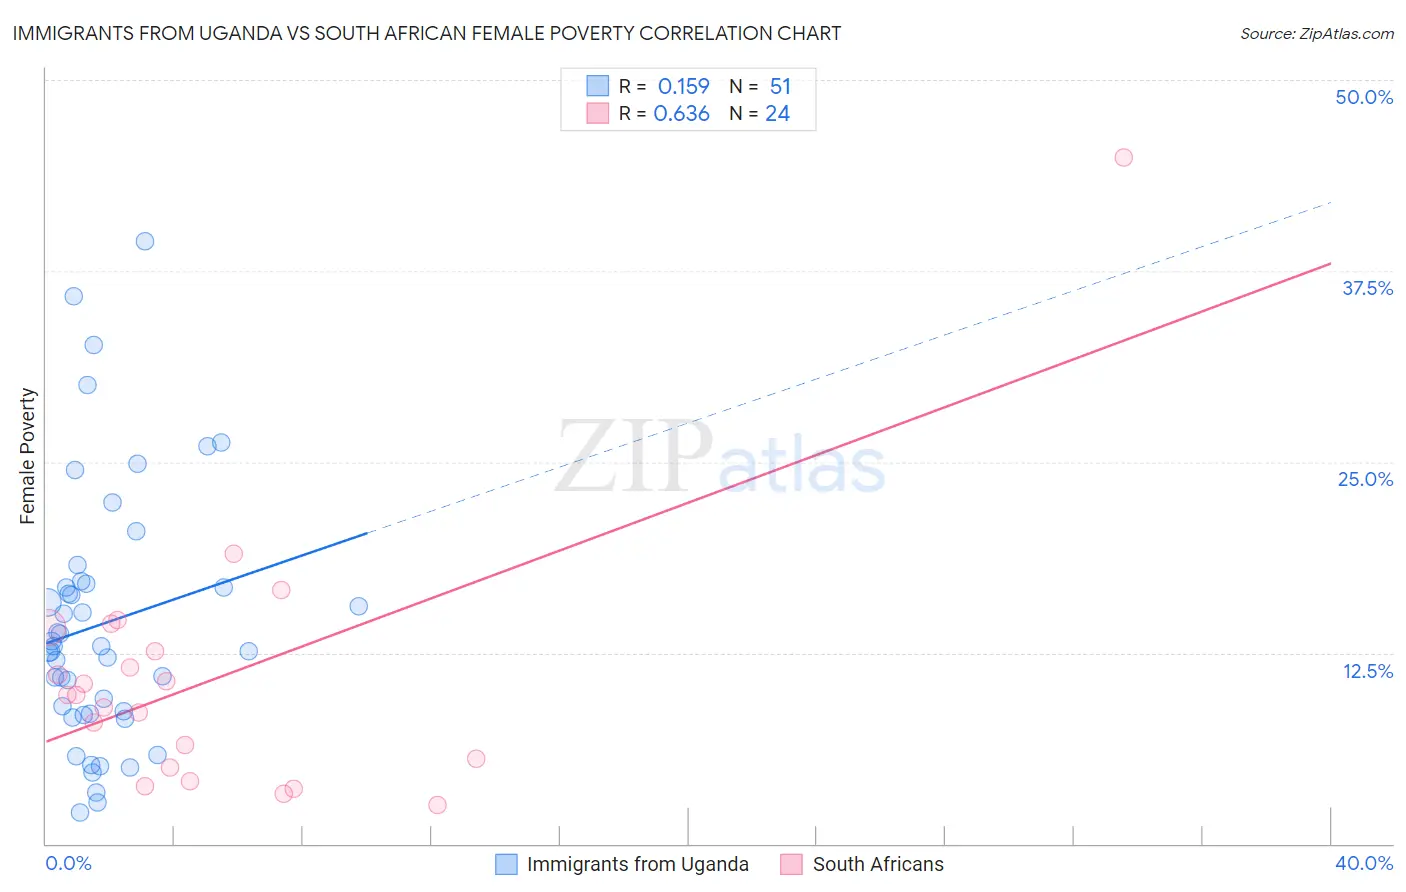 Immigrants from Uganda vs South African Female Poverty